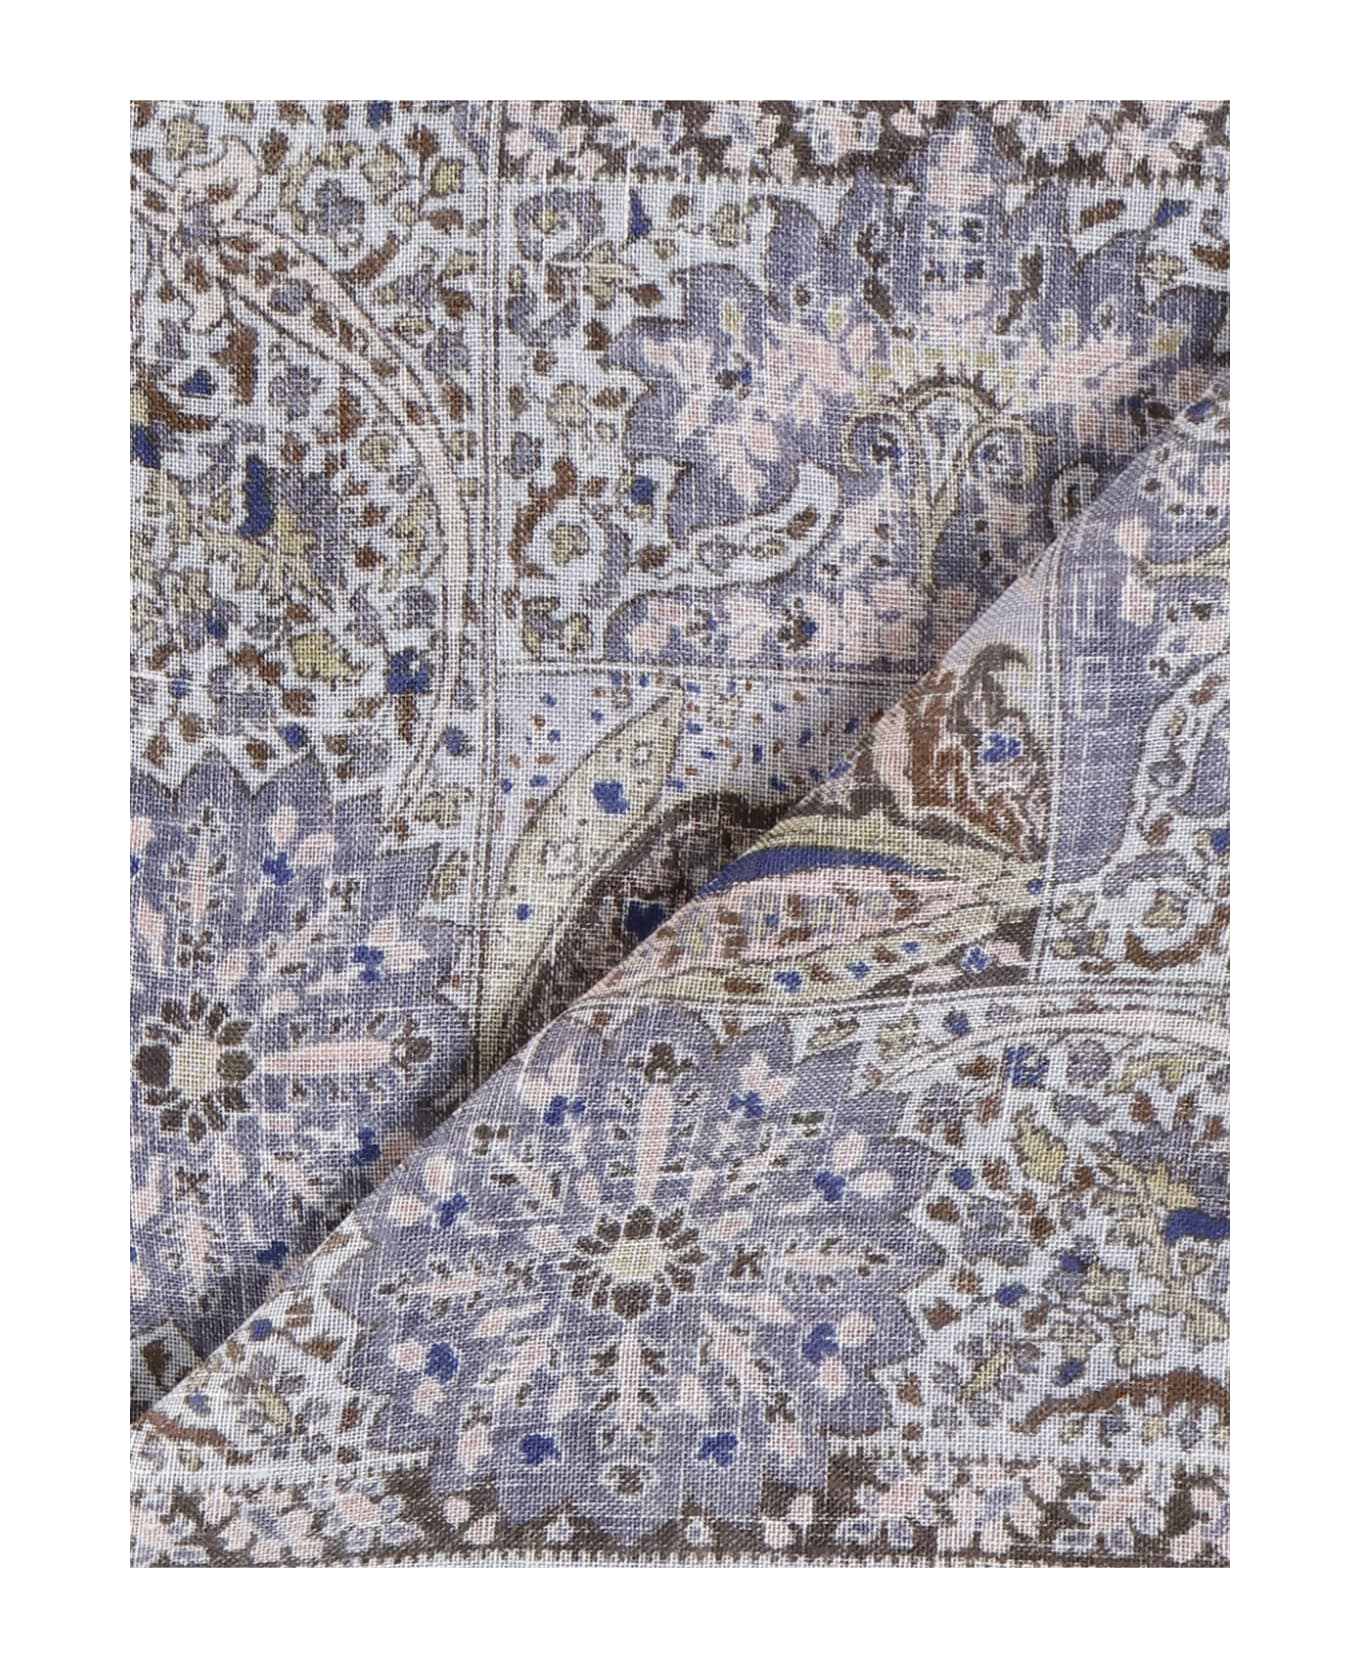 Etro Paisley Scarf In Cashmere Blend - Stampa f.do azzurro スカーフ